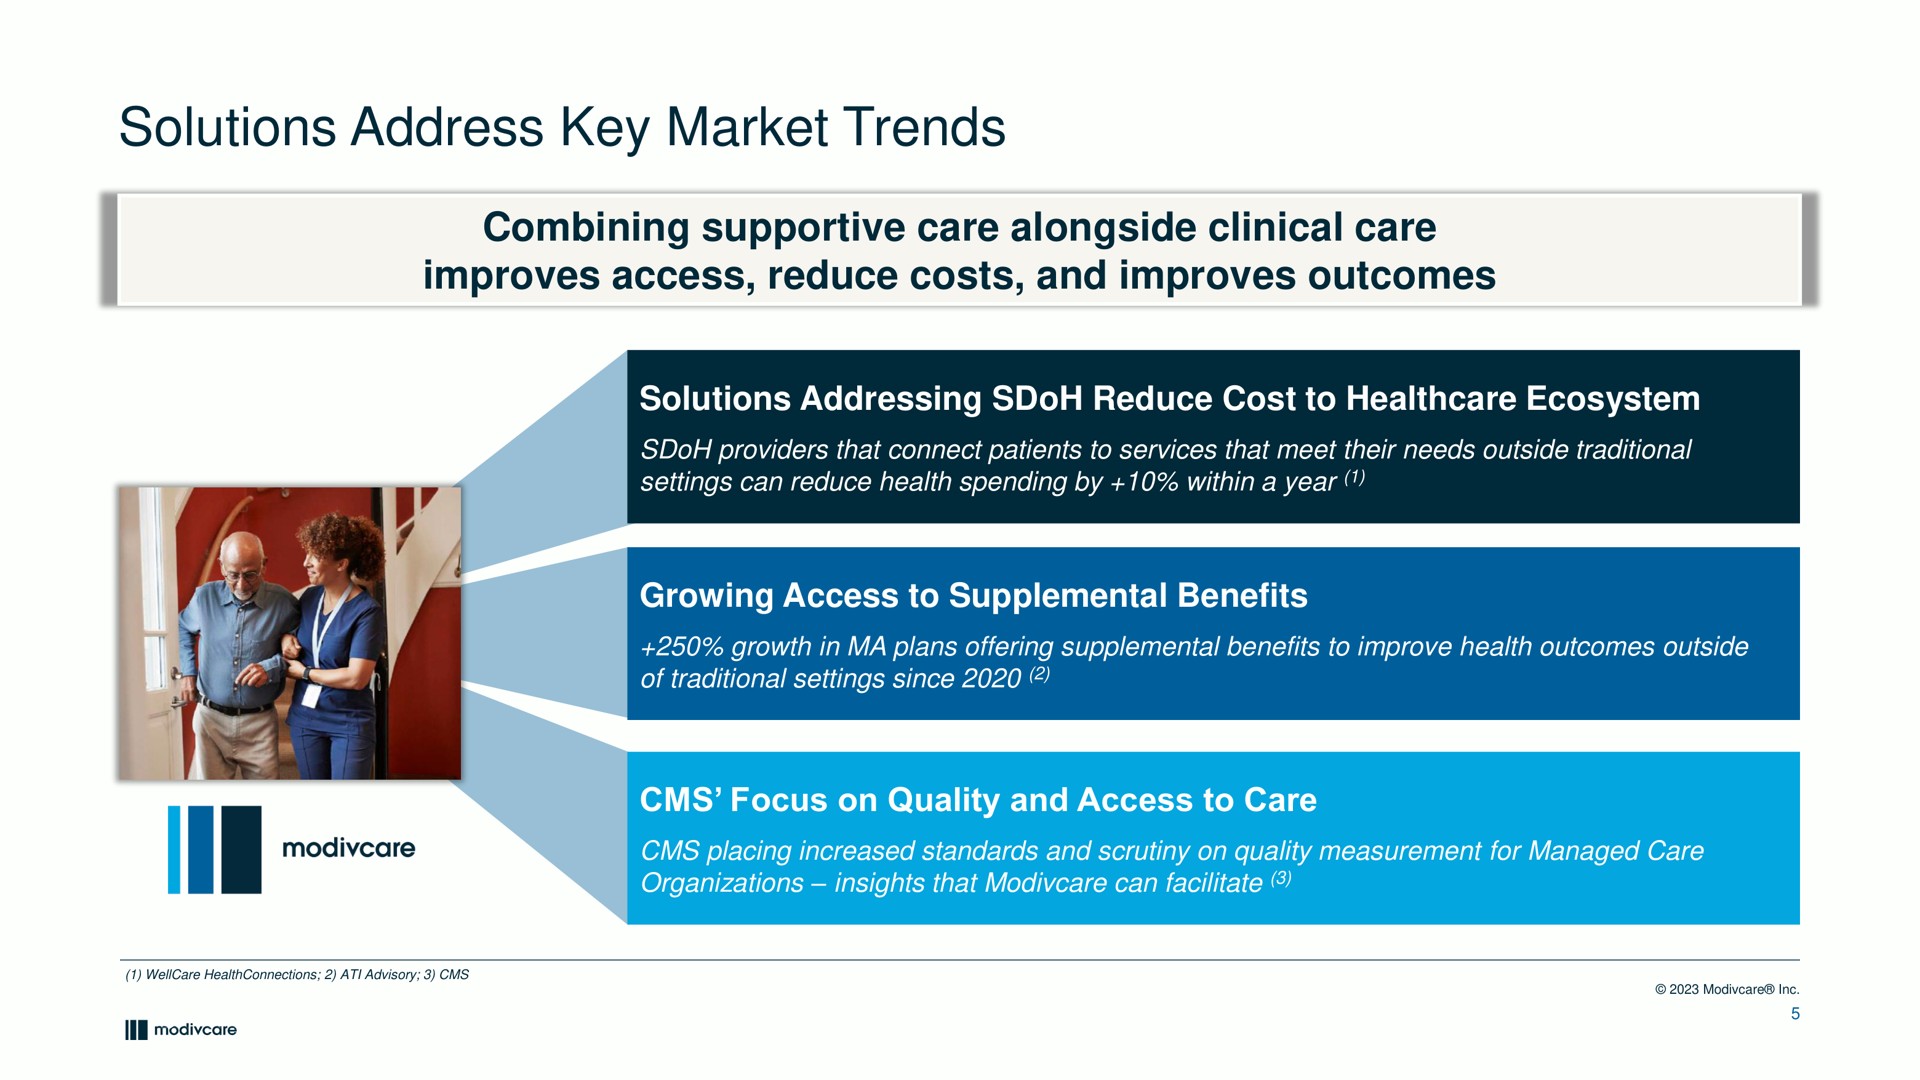 solutions address key market trends combining supportive care alongside clinical care improves access reduce costs and improves outcomes solutions addressing reduce cost to ecosystem growing access to supplemental benefits focus on quality and access to care | ModivCare